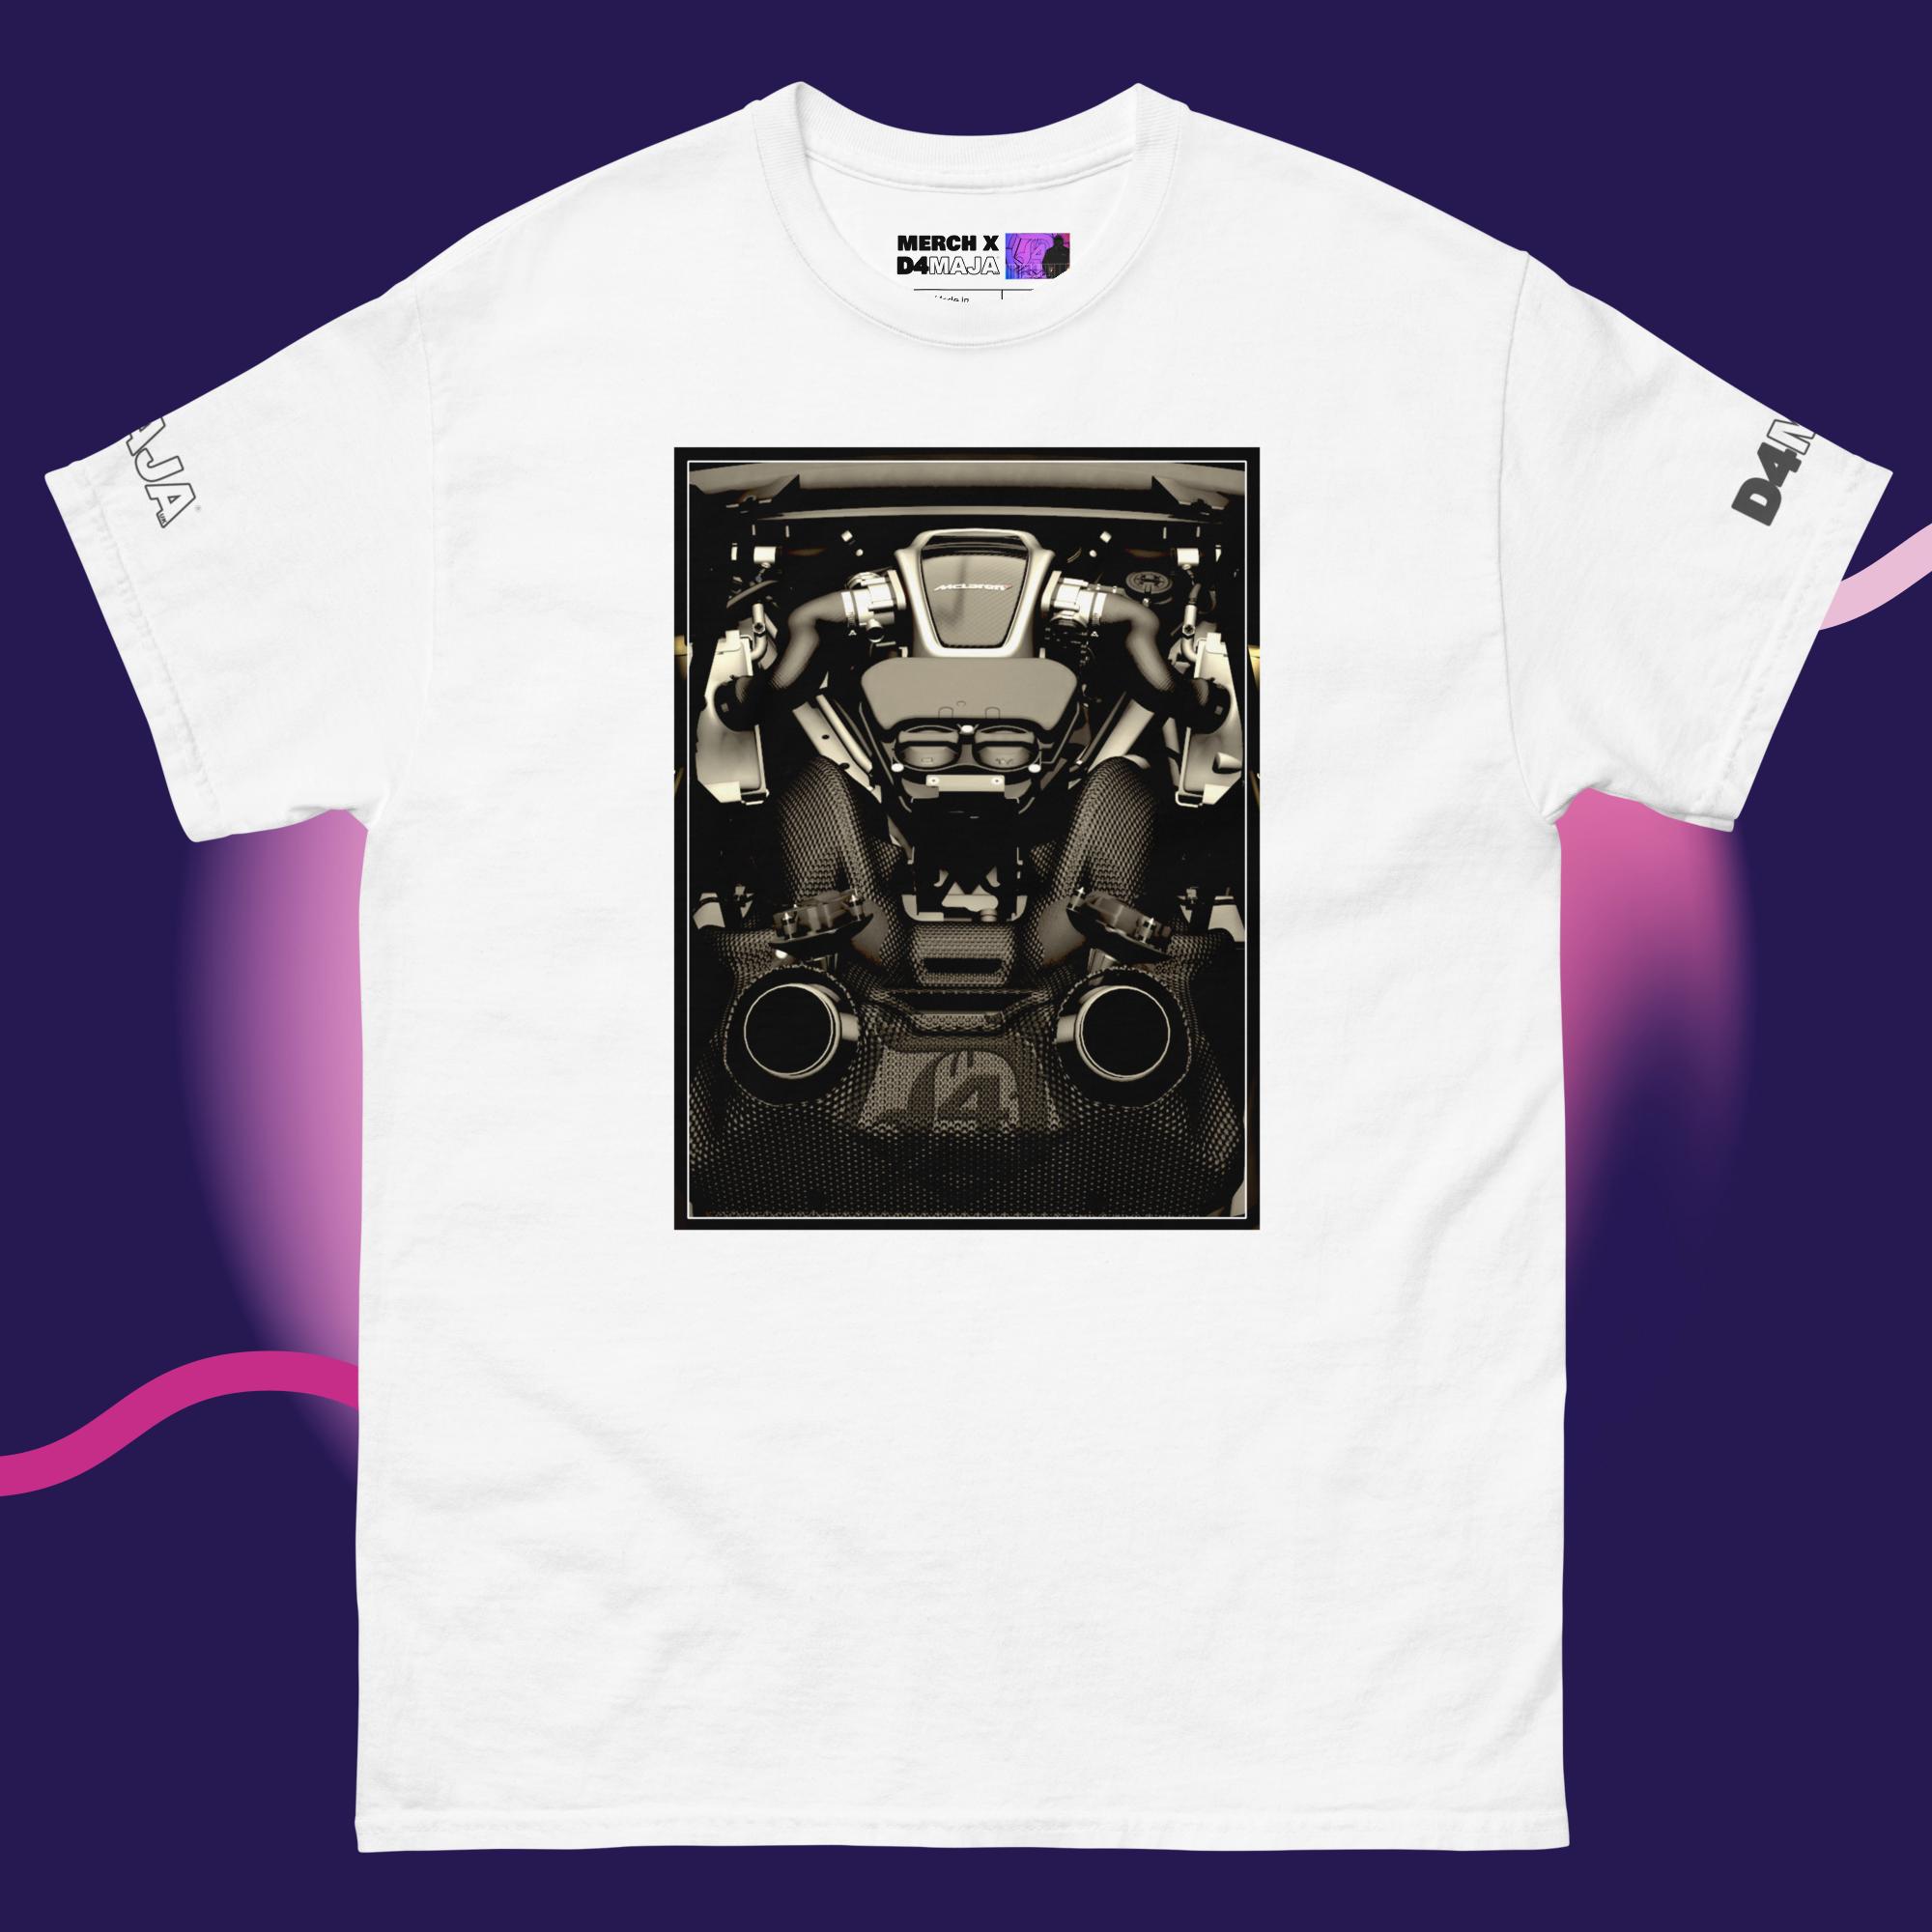 Rev Your Engines logo styled t-shirt